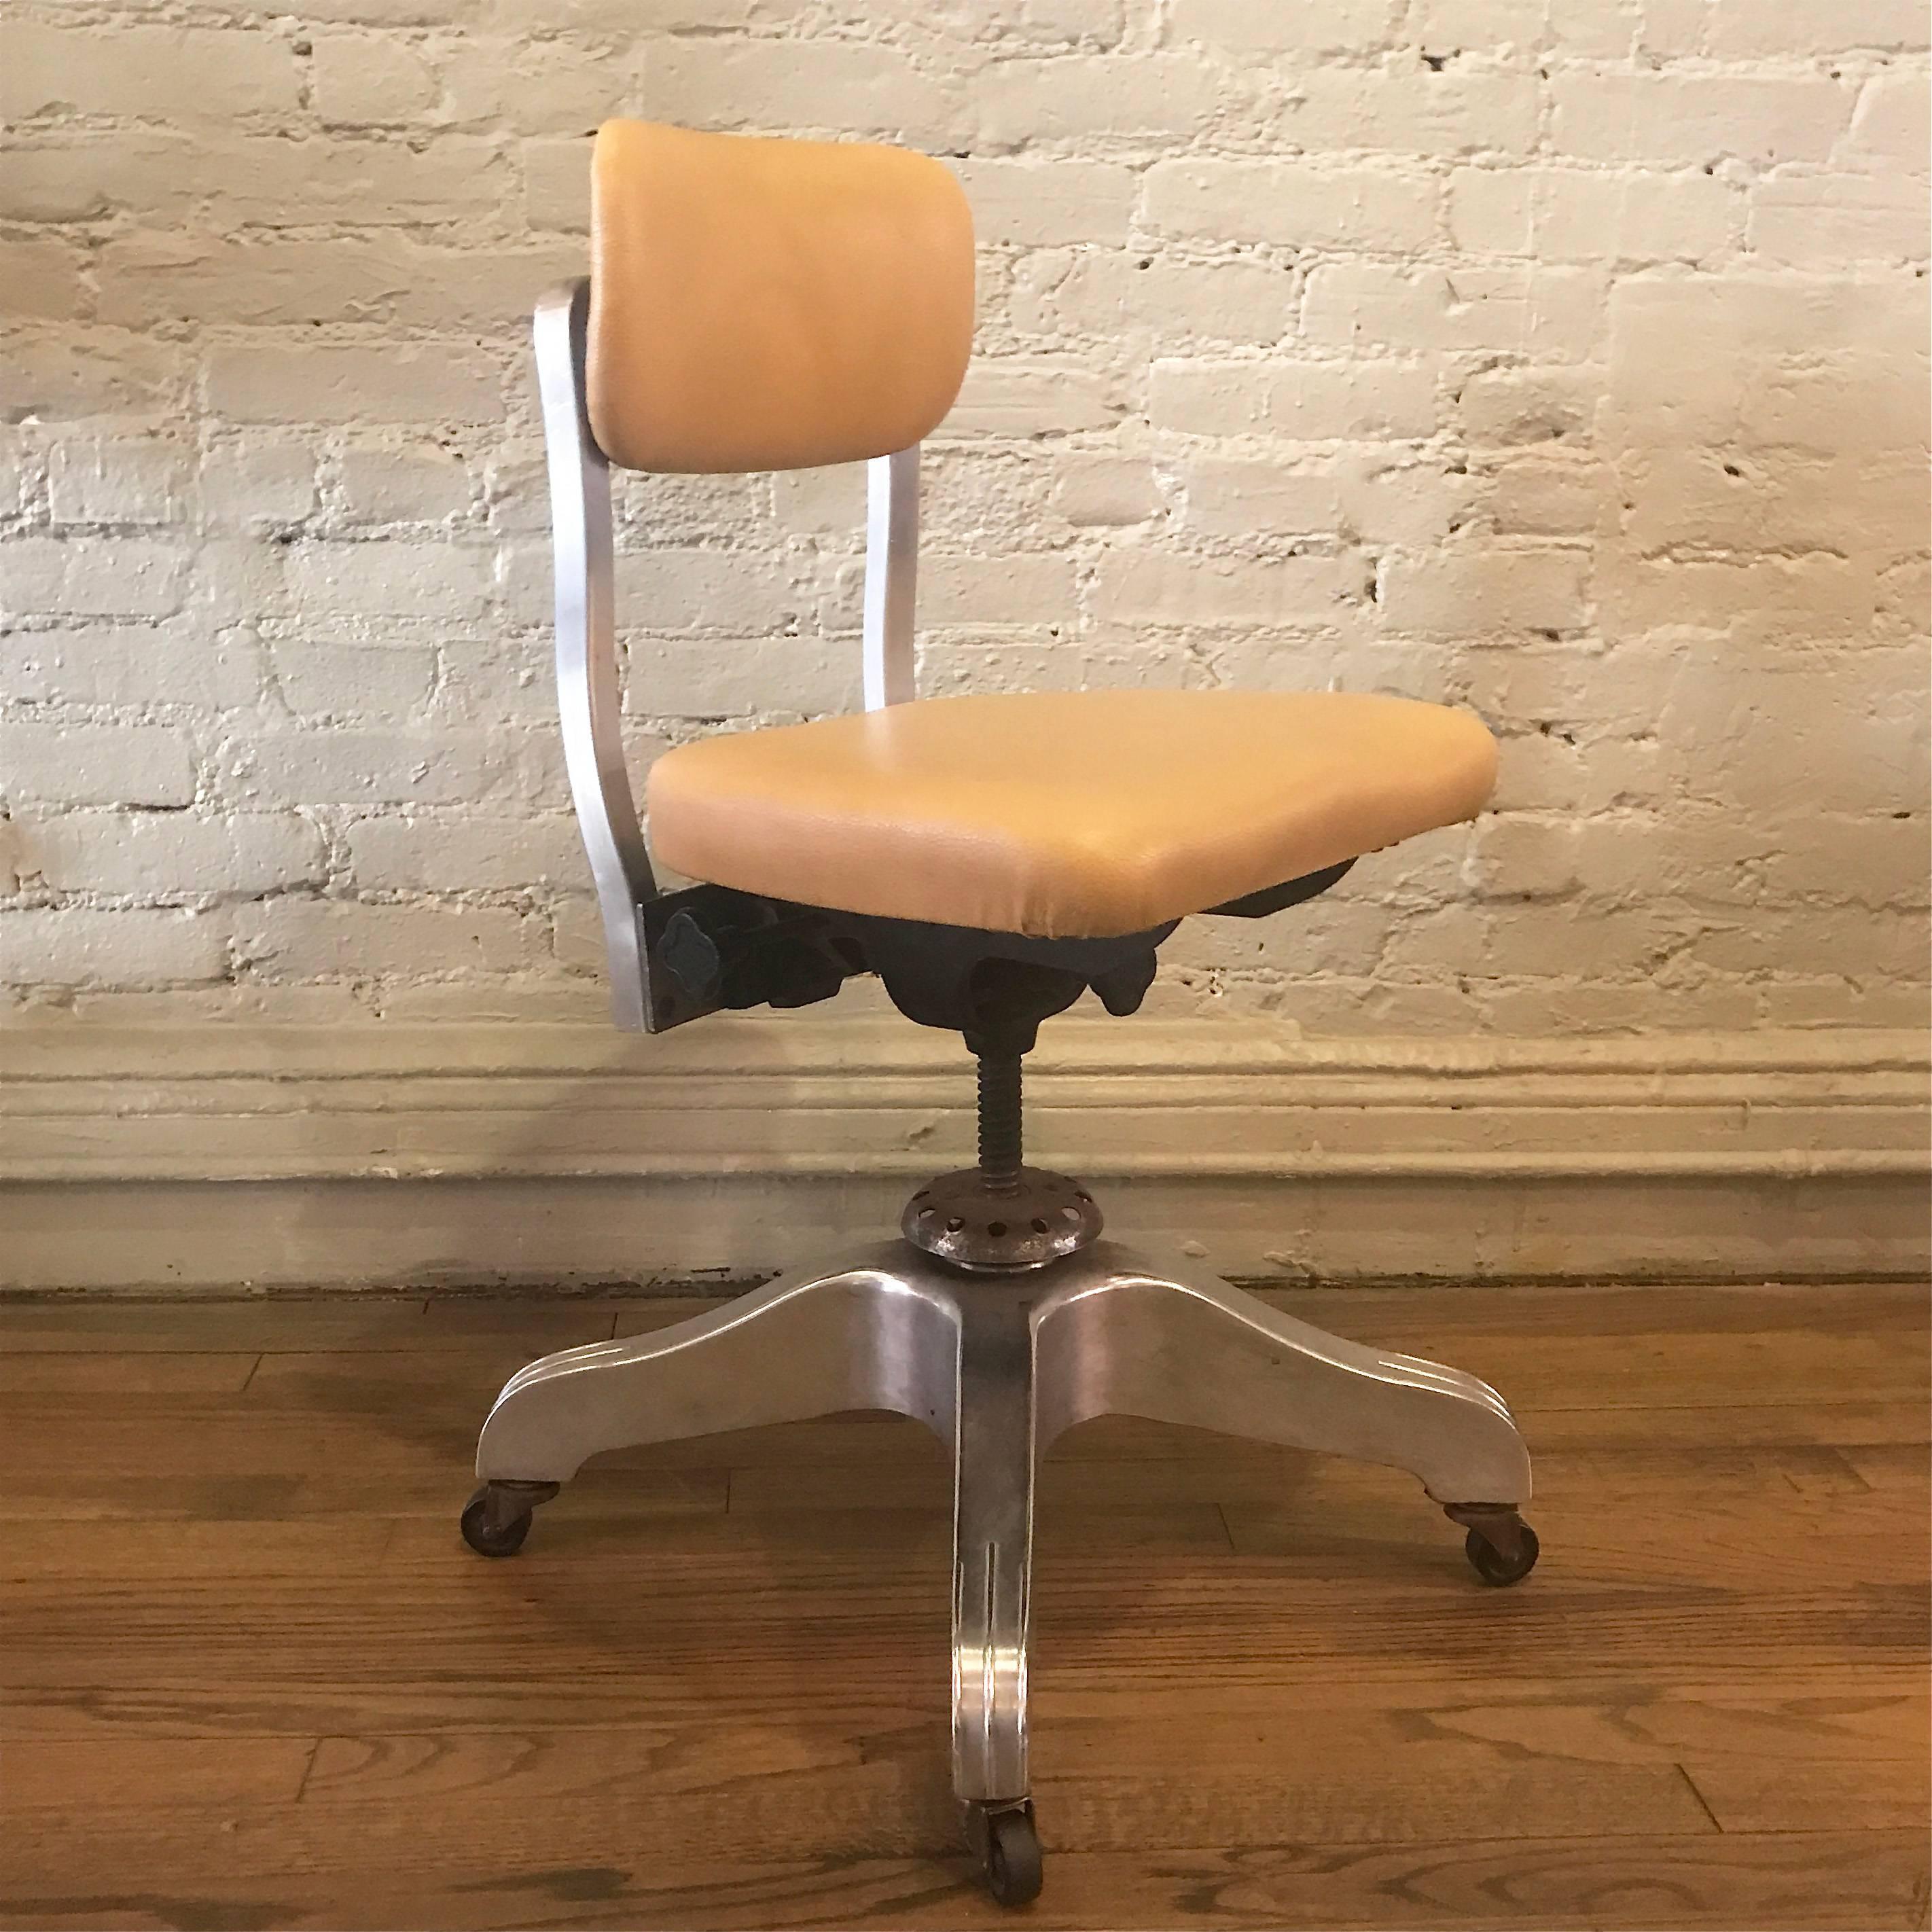 Industrial, atomic-age, aluminum, rolling, goodform, office, desk chair by the general fireproofing company is height adjustable and features newly upholstered seat and back in textured, buttery tan leather.